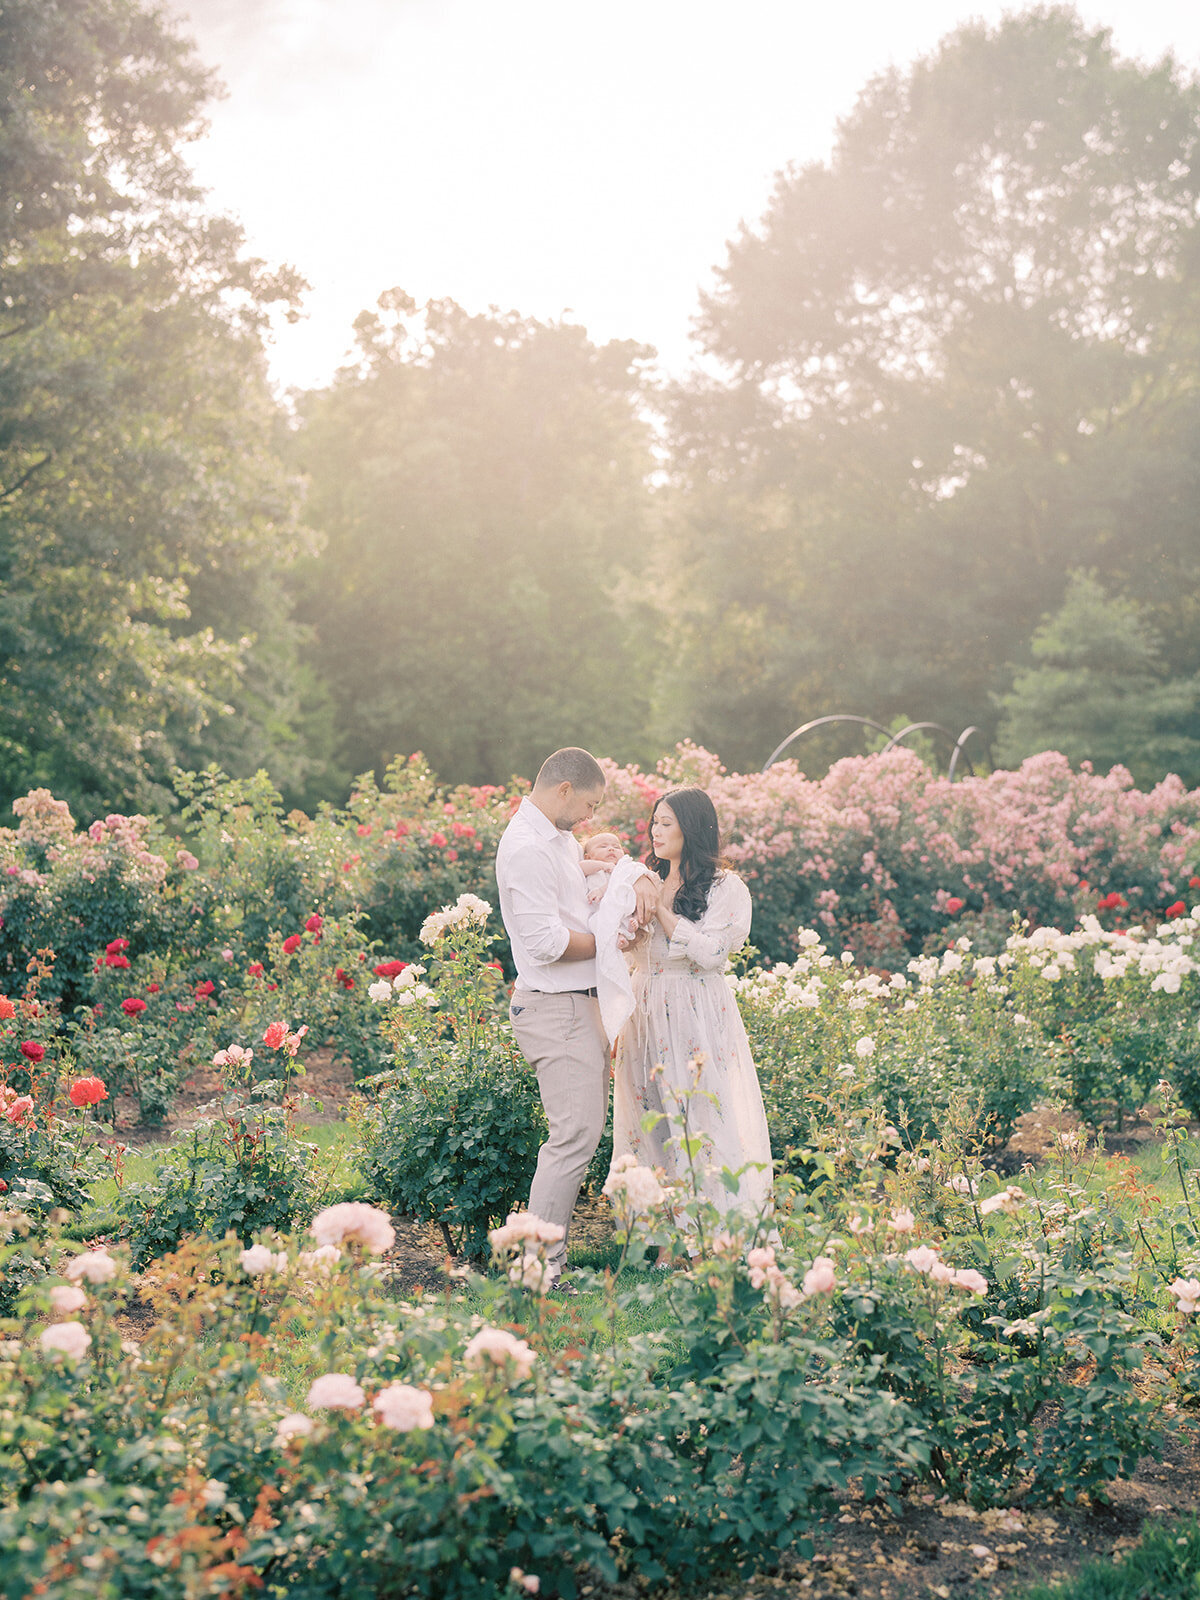 Mother and father stand together in a rose garden in Northern VA holding their baby girl.